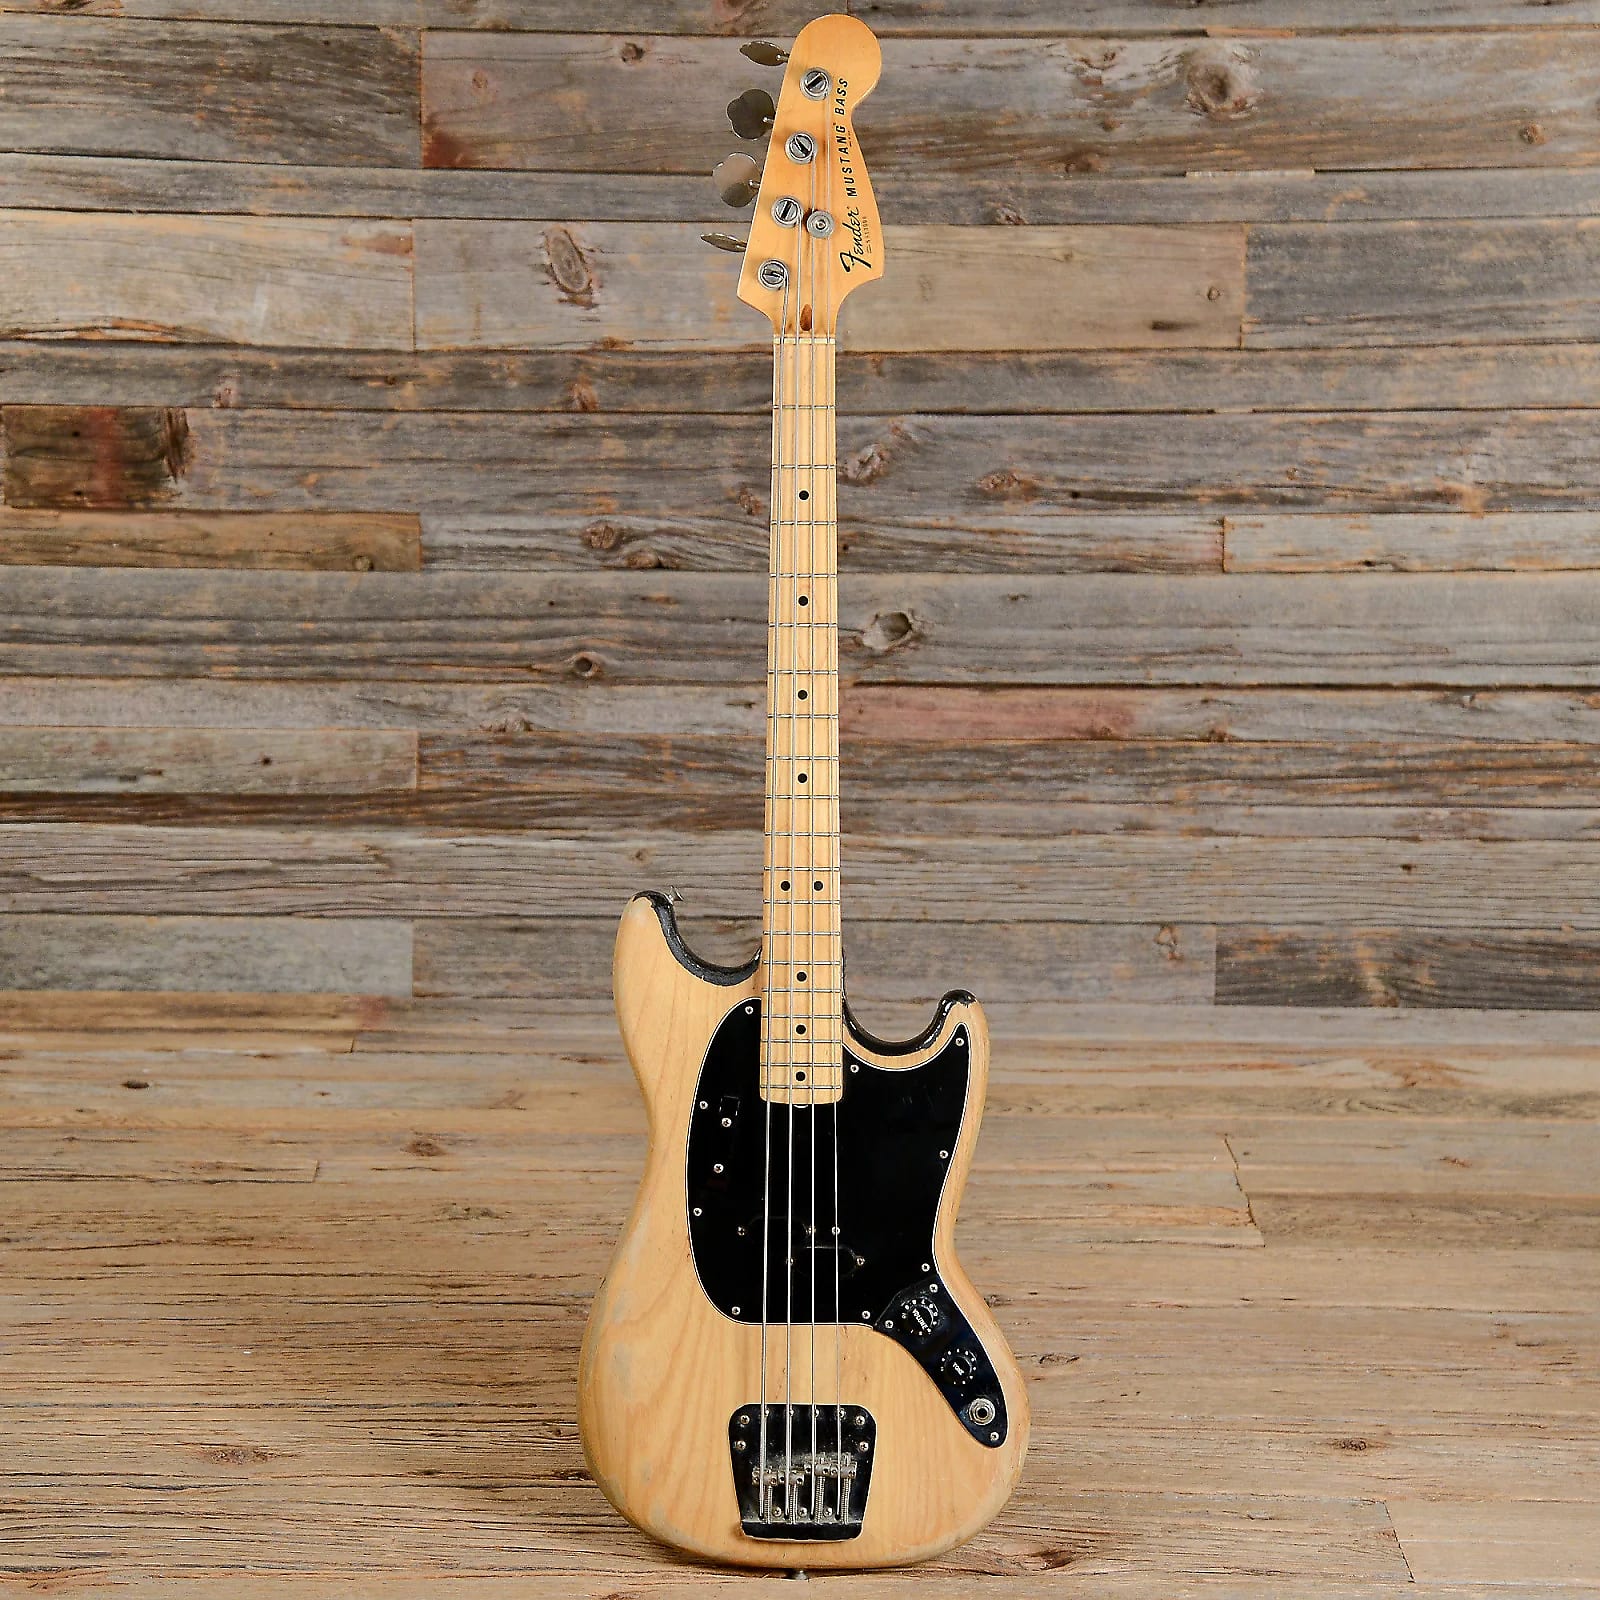 Fender Mustang Bass (Refinished) 1966 - 1981 | Reverb